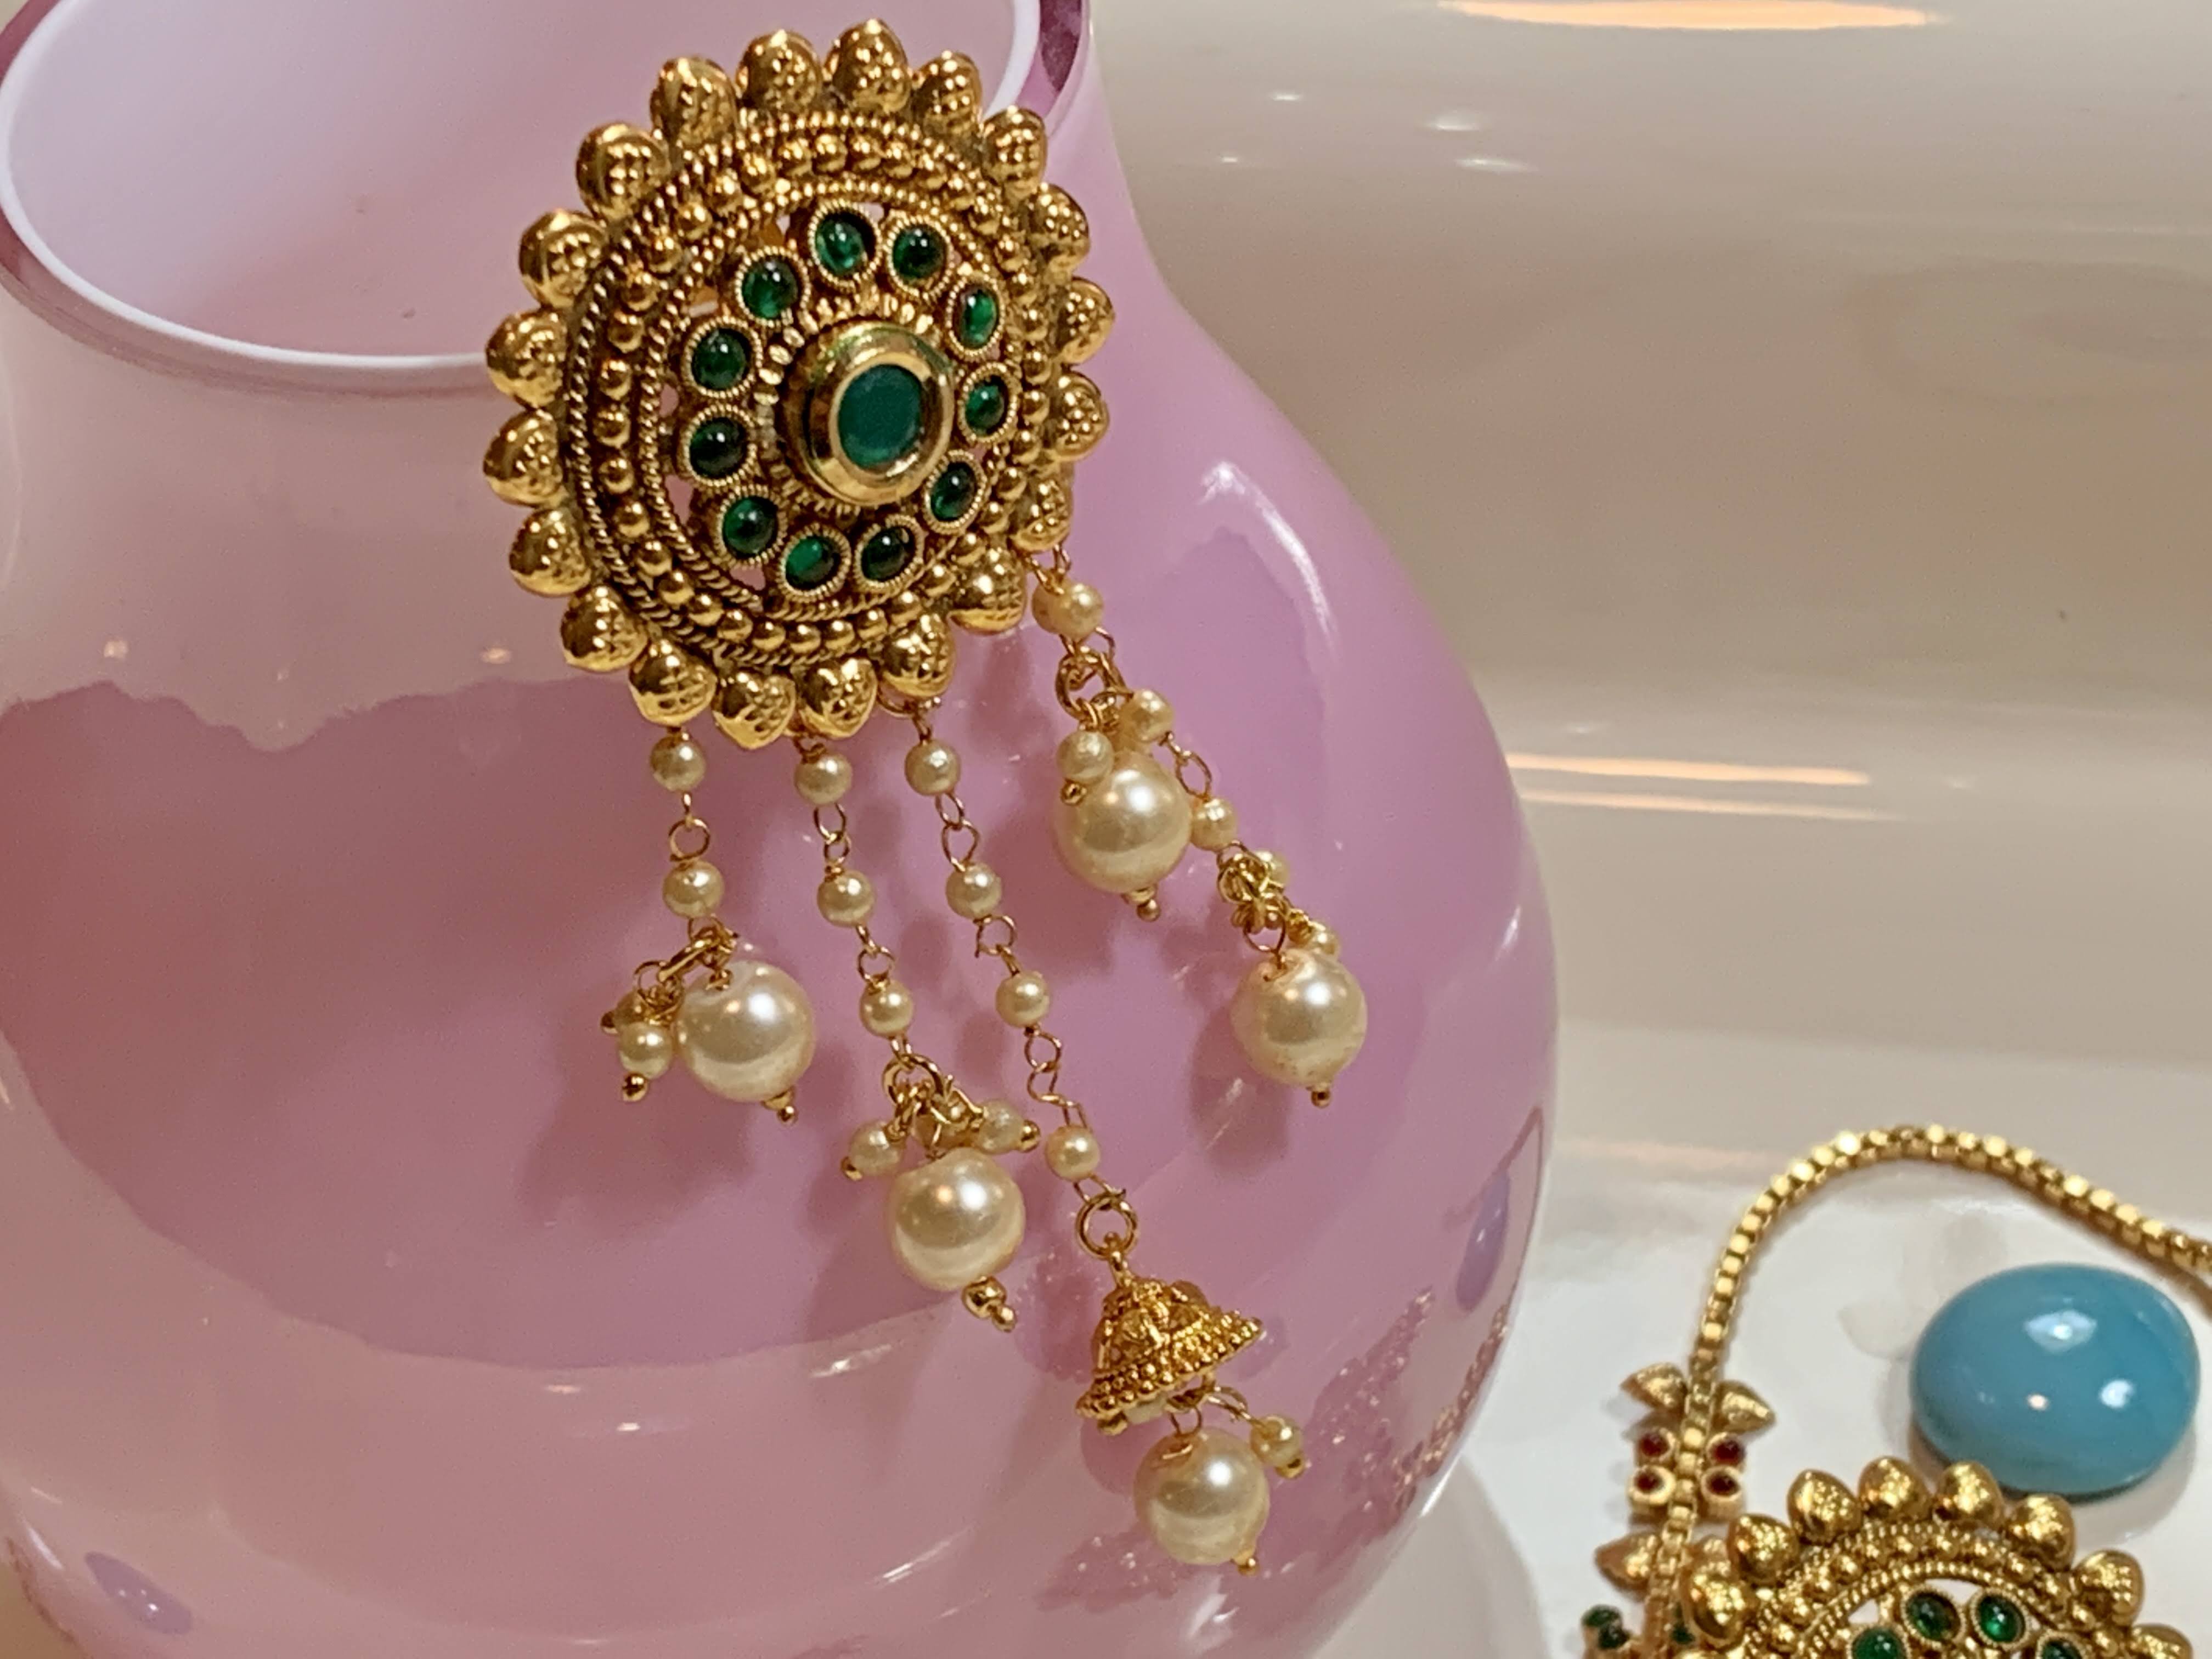 Gold Plated Jhumki Earrings - Temple Jewelry - Kemp Stone and Pearl Beads Studded